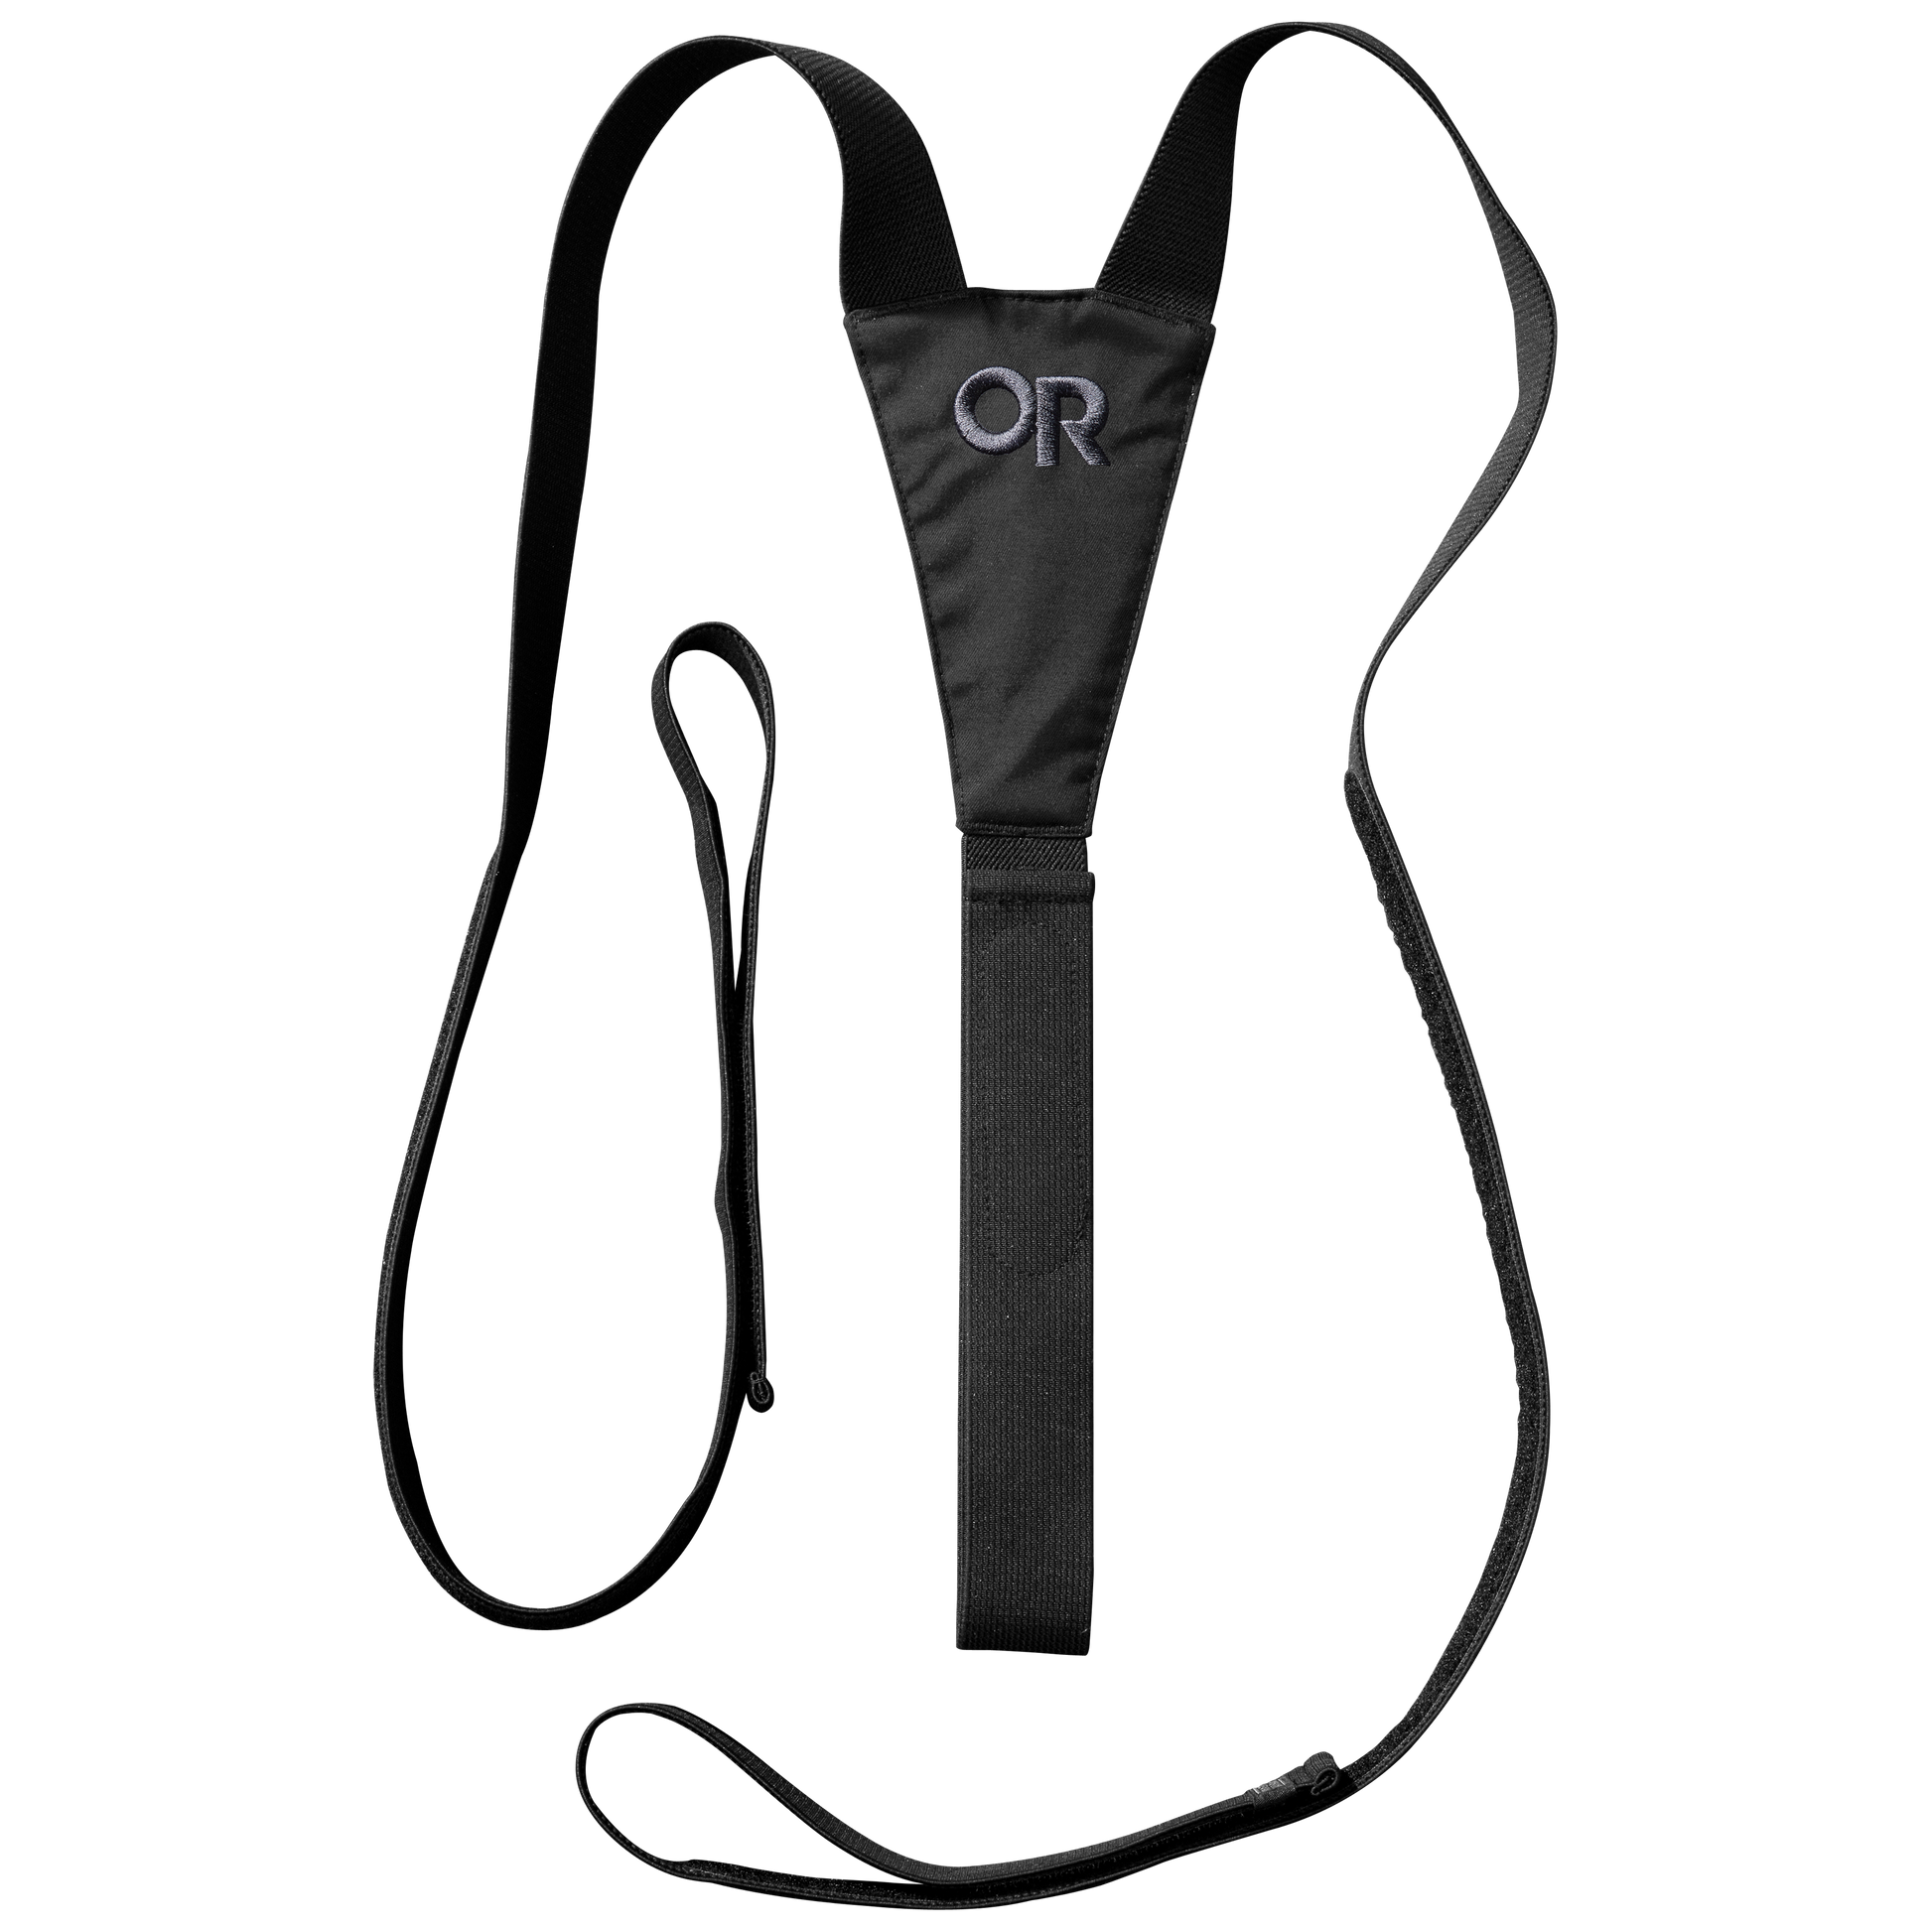 Hikers Button Fly Suspenders - Black - Xs